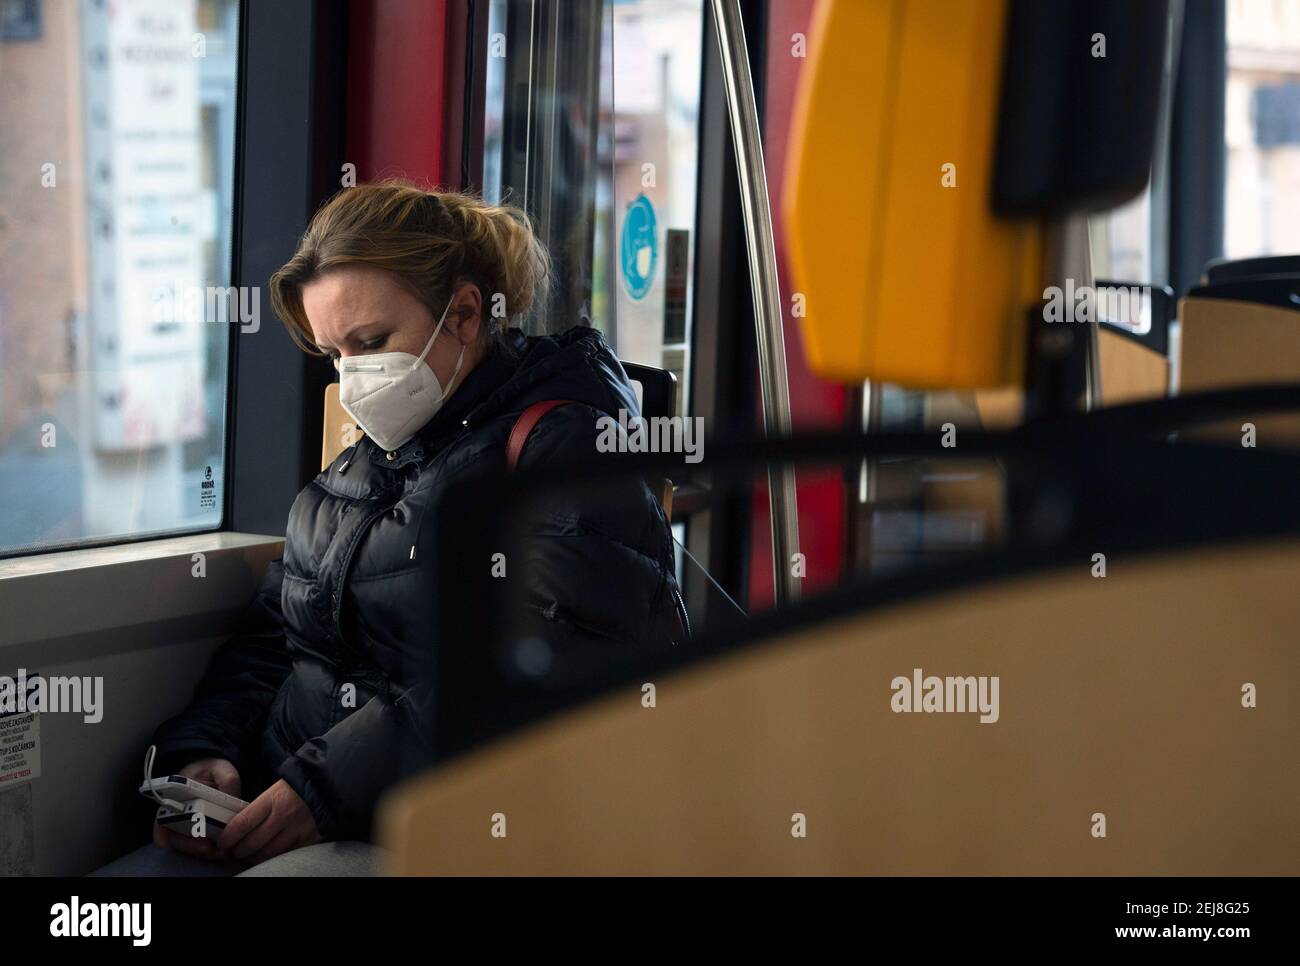 Prague, Czech Republic. 20th Feb, 2021. People with respirators in public transport, on Saturday, February 20, 2021, in Prague, Czech Republic. Health Ministry orders wearing of respirators, nano masks or two surgical face masks in shops, public transport and other public places from Monday, February 22. Credit: Katerina Sulova/CTK Photo/Alamy Live News Stock Photo